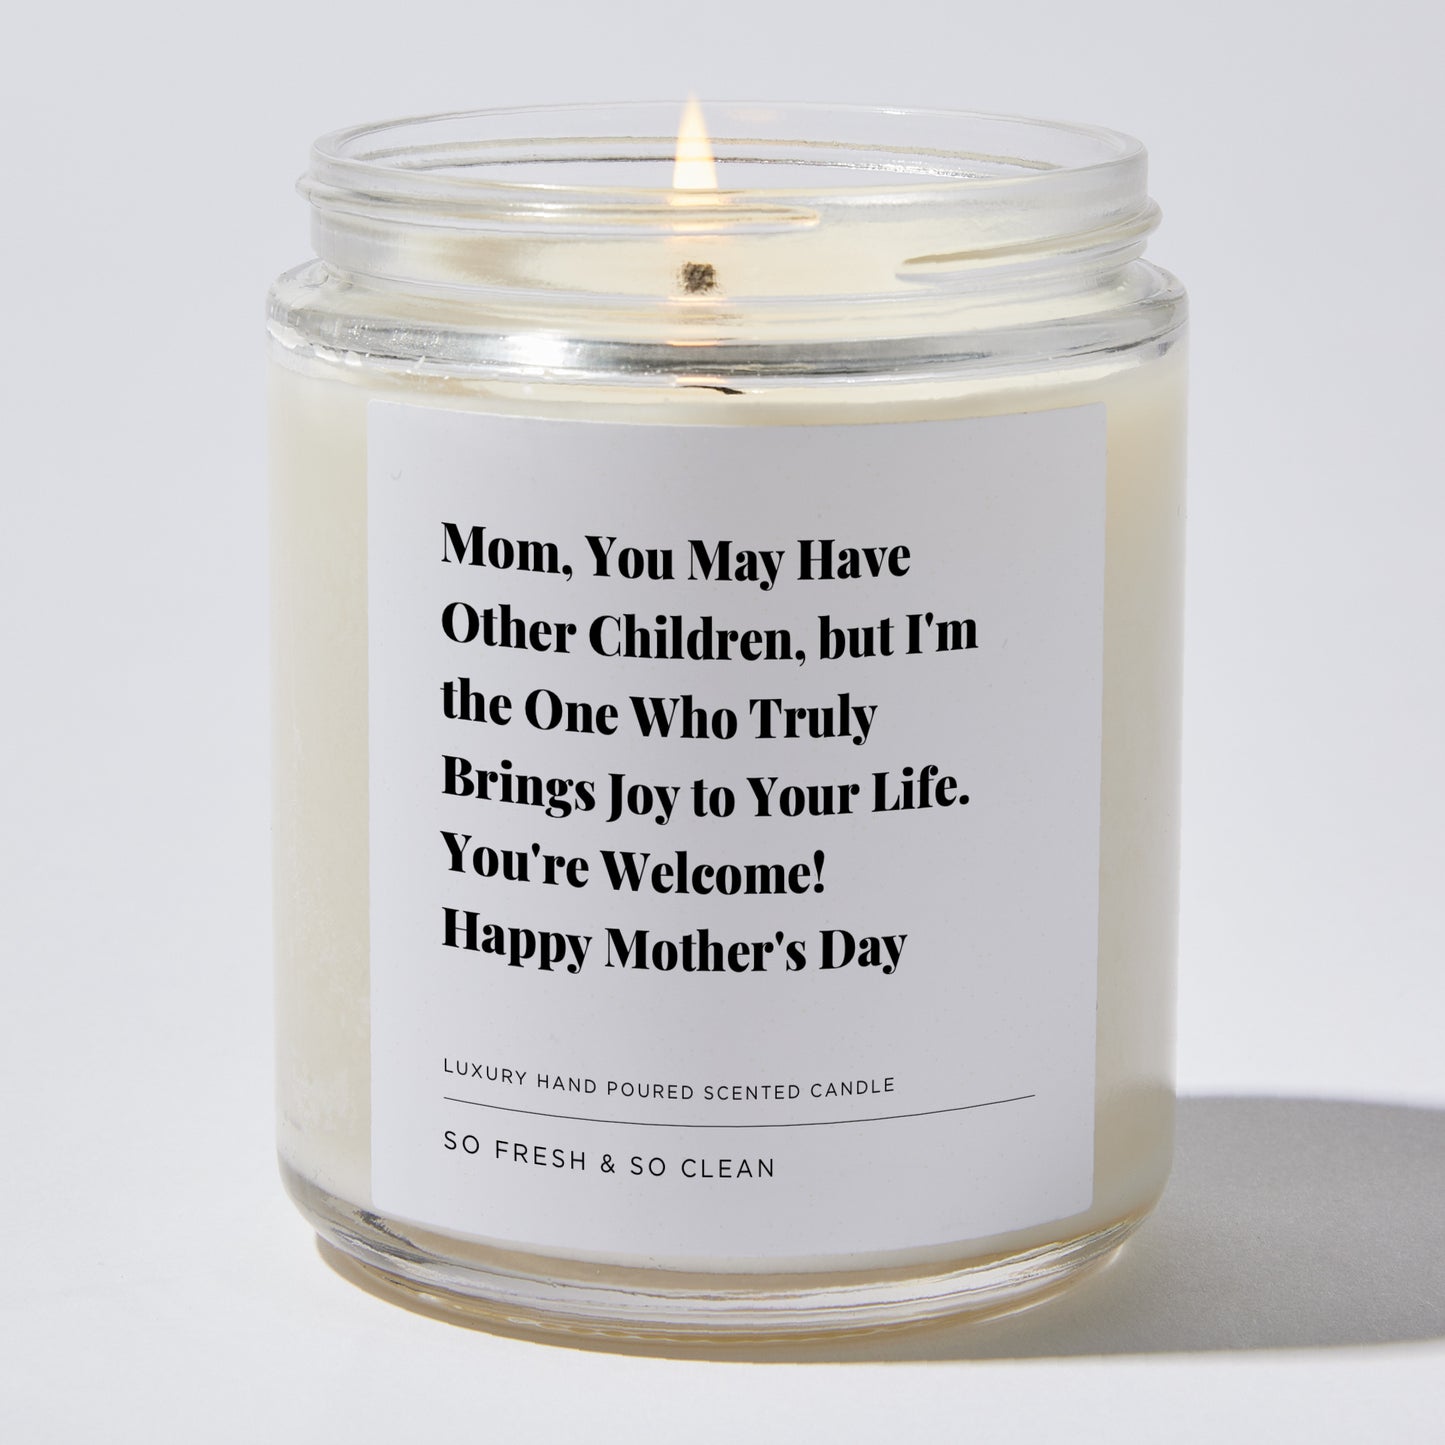 Gift for Mom - Mom, you may have other children, but I'm the one who truly brings joy to your life. You're welcome! Happy Mother's Day - Candle